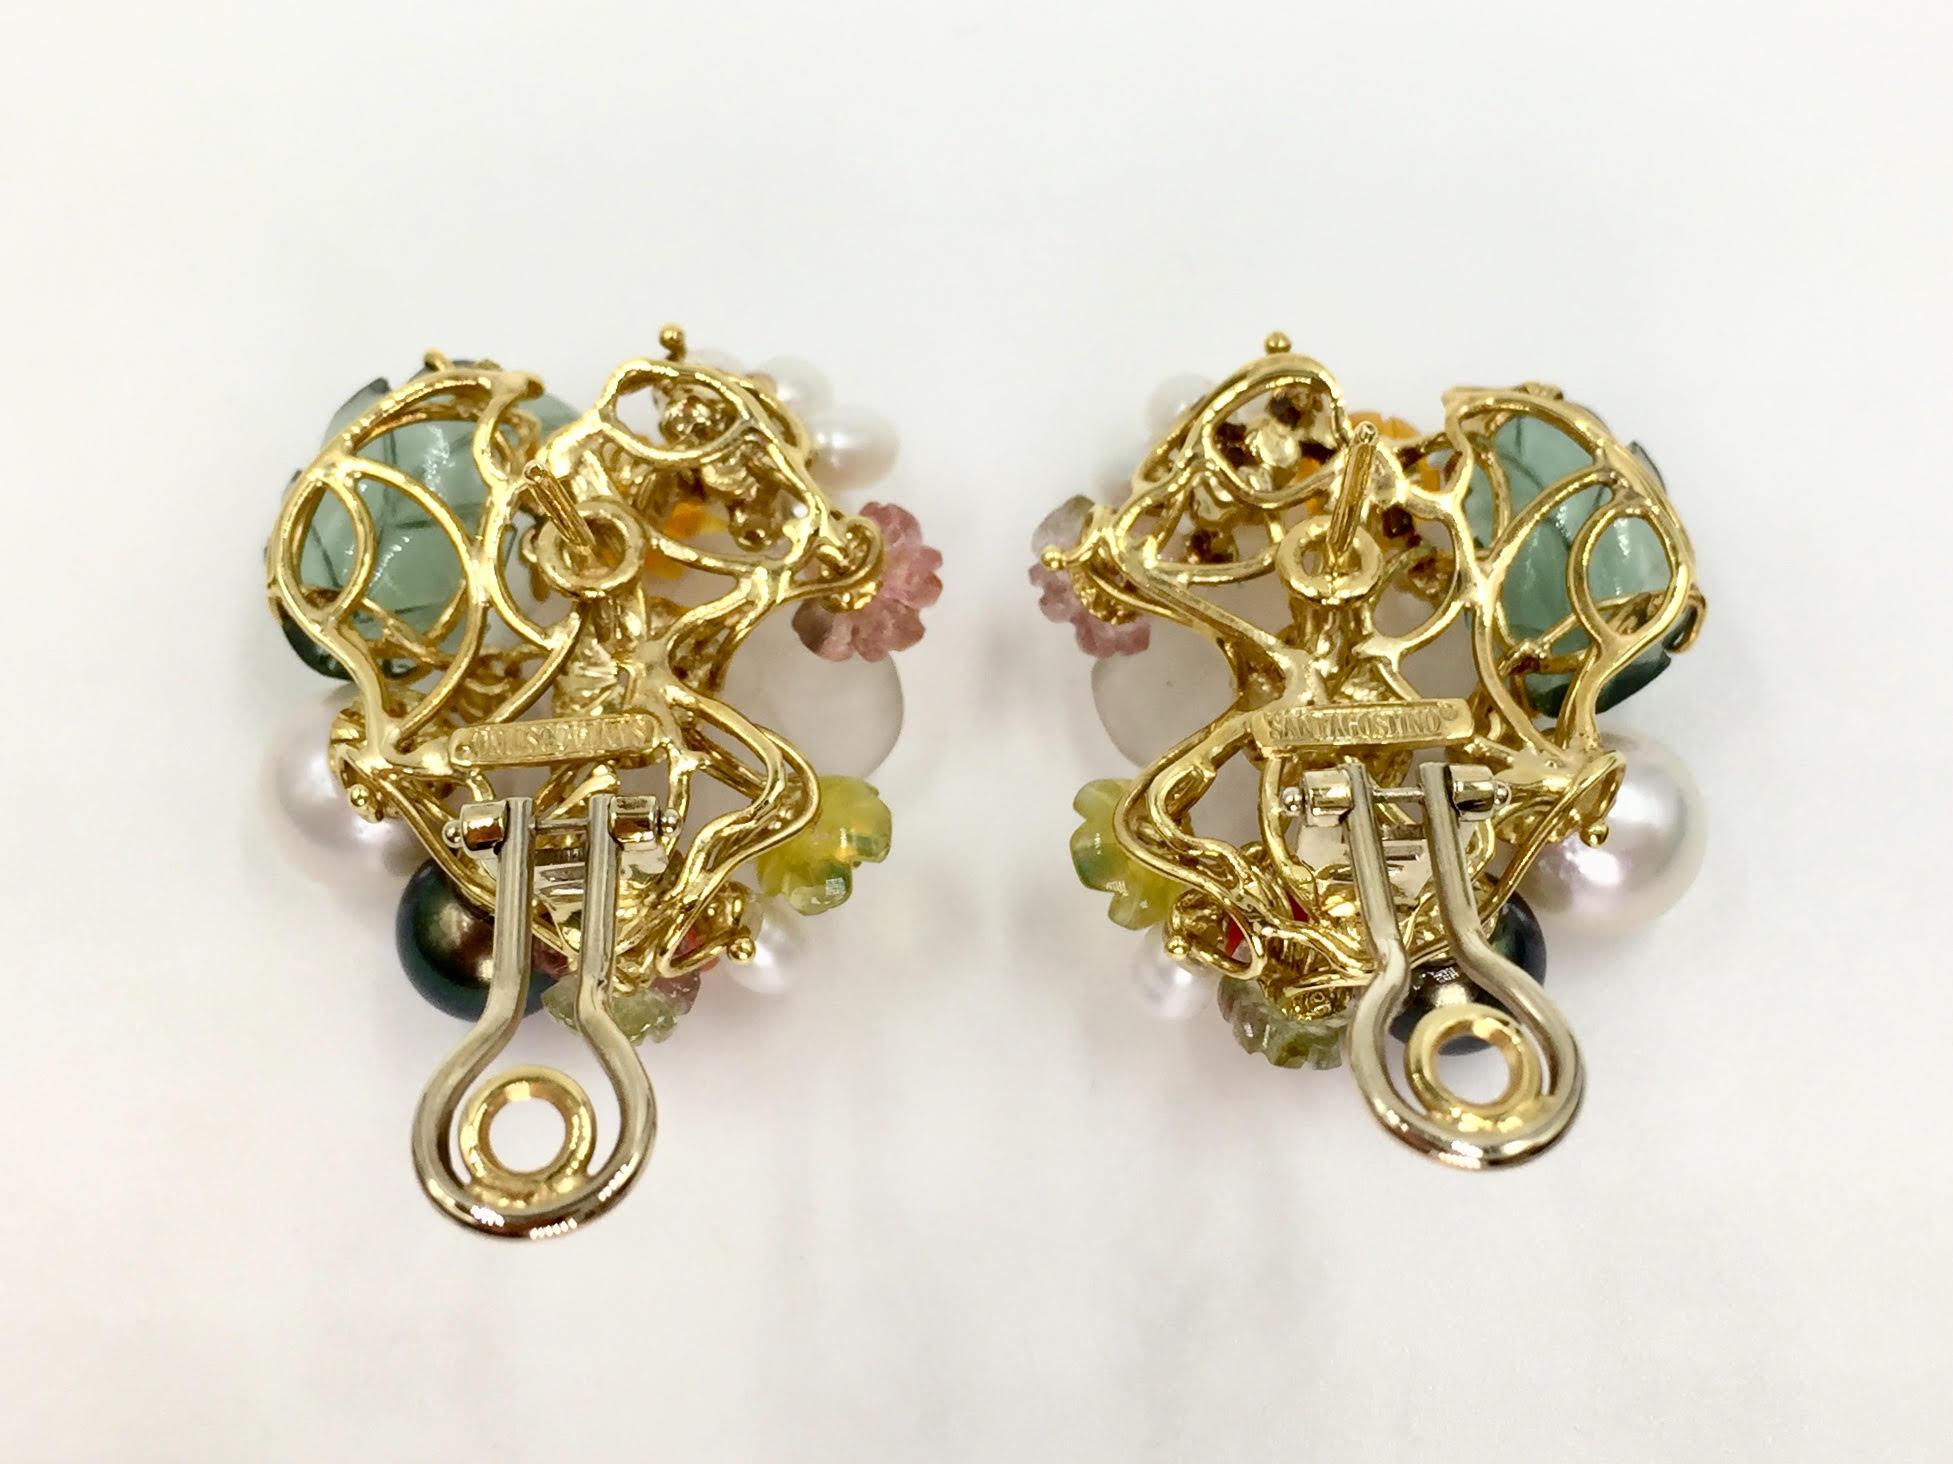 Women's Santagostino Floral Earrings with Pearls, Diamonds and Gemstones